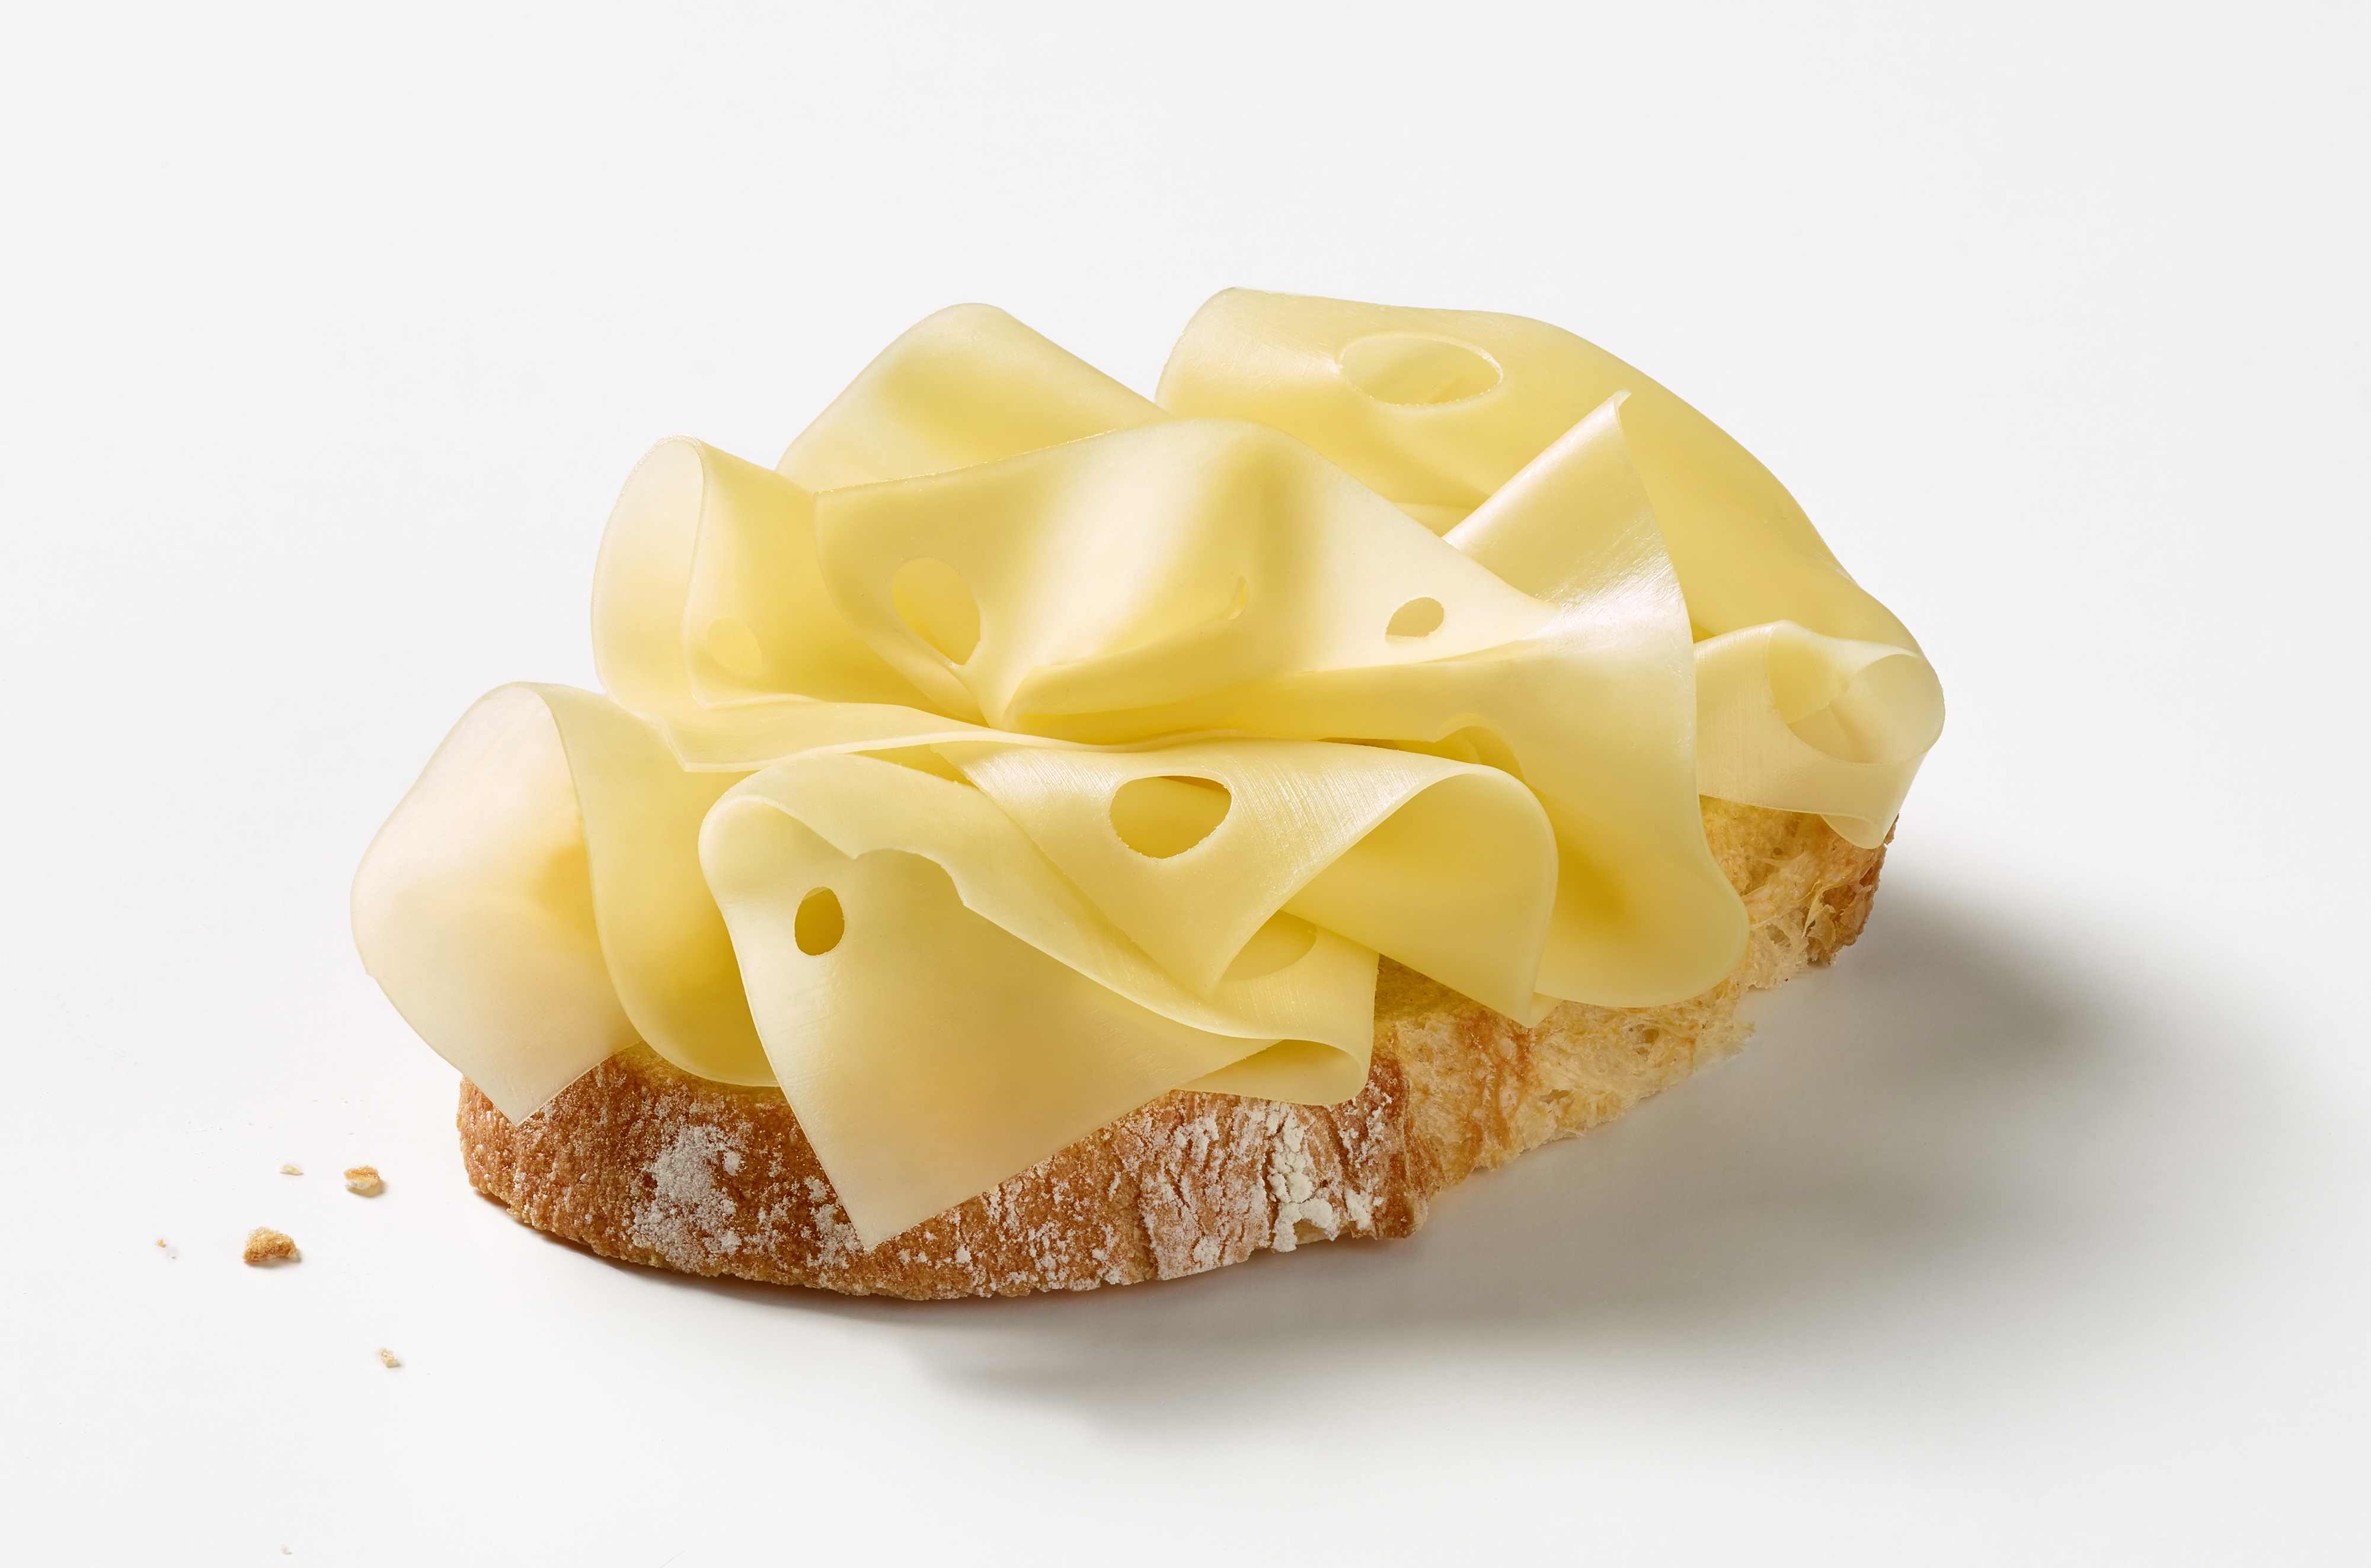 several slices of Cheese on a bread